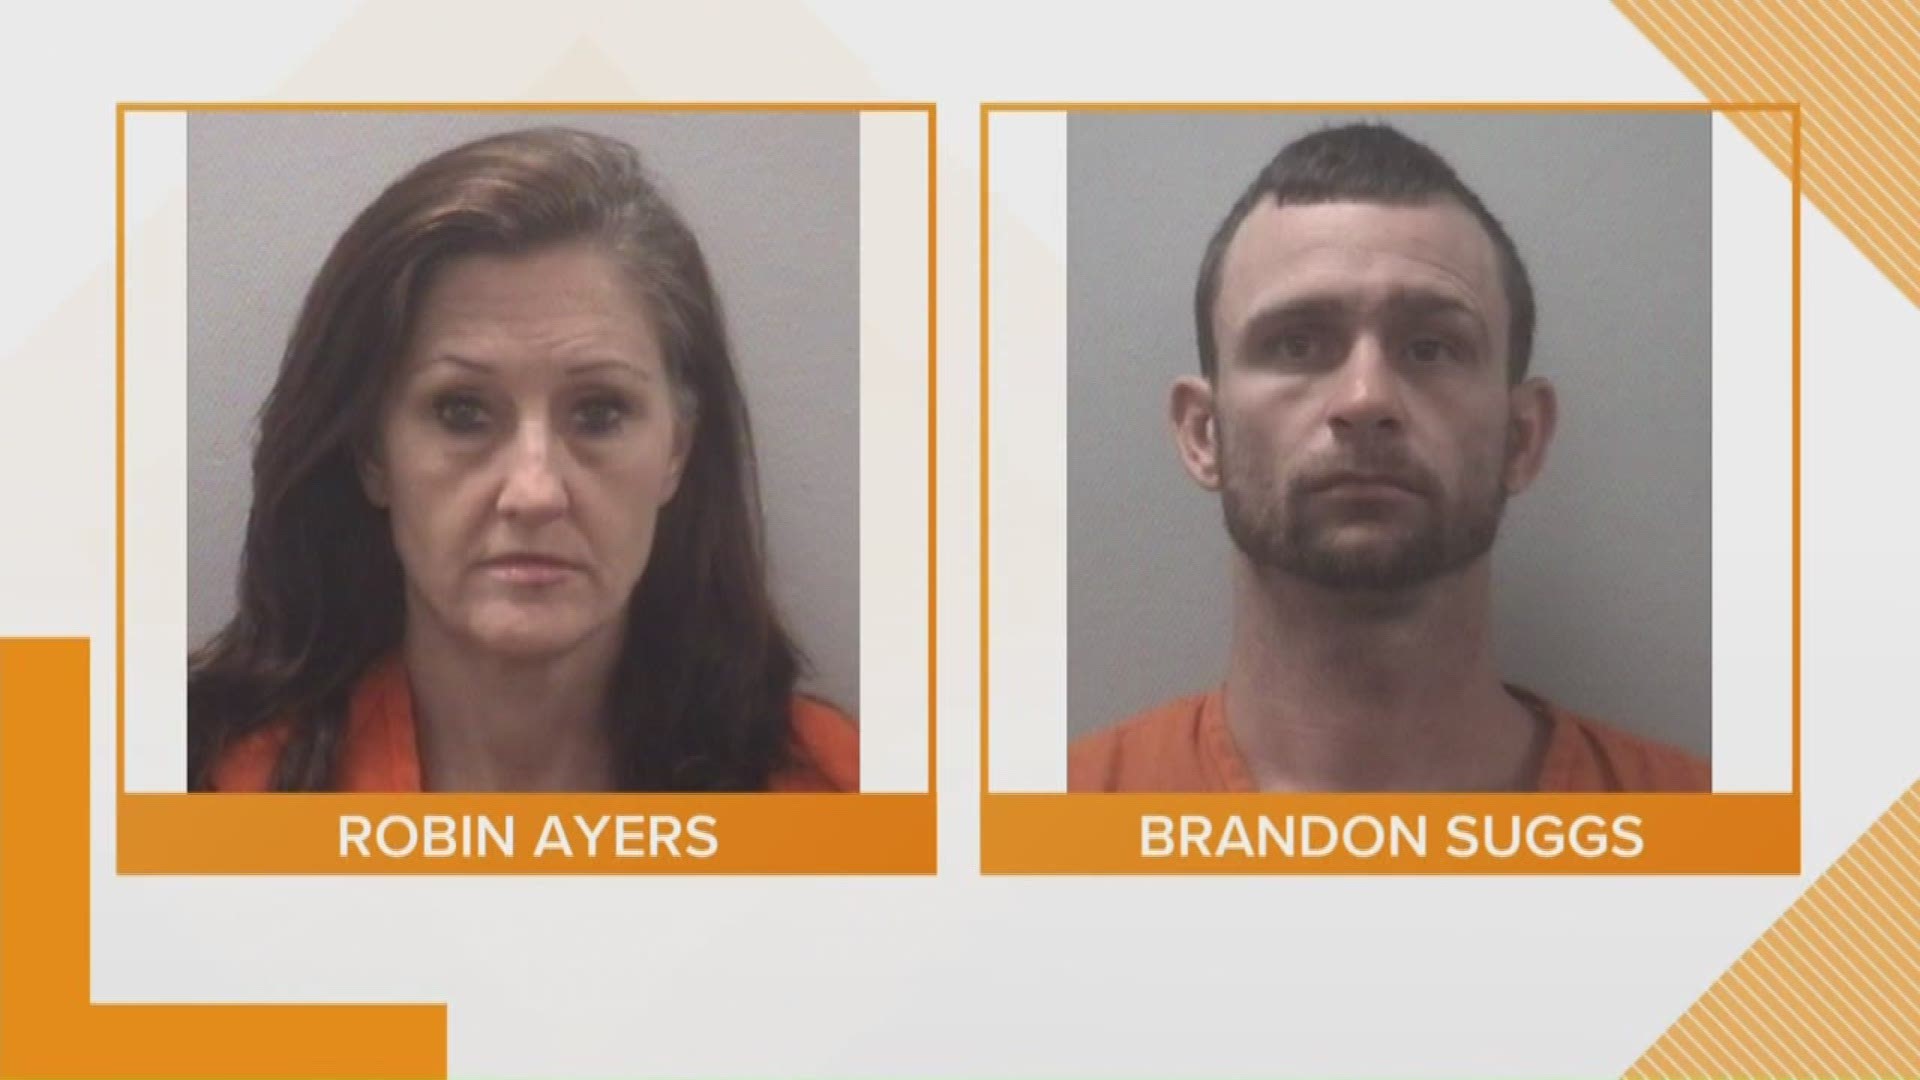 Police say they are looking for Robin Ayers and Brandon Suggs in connection to a shoplifting incident at Kohl's on June 6.